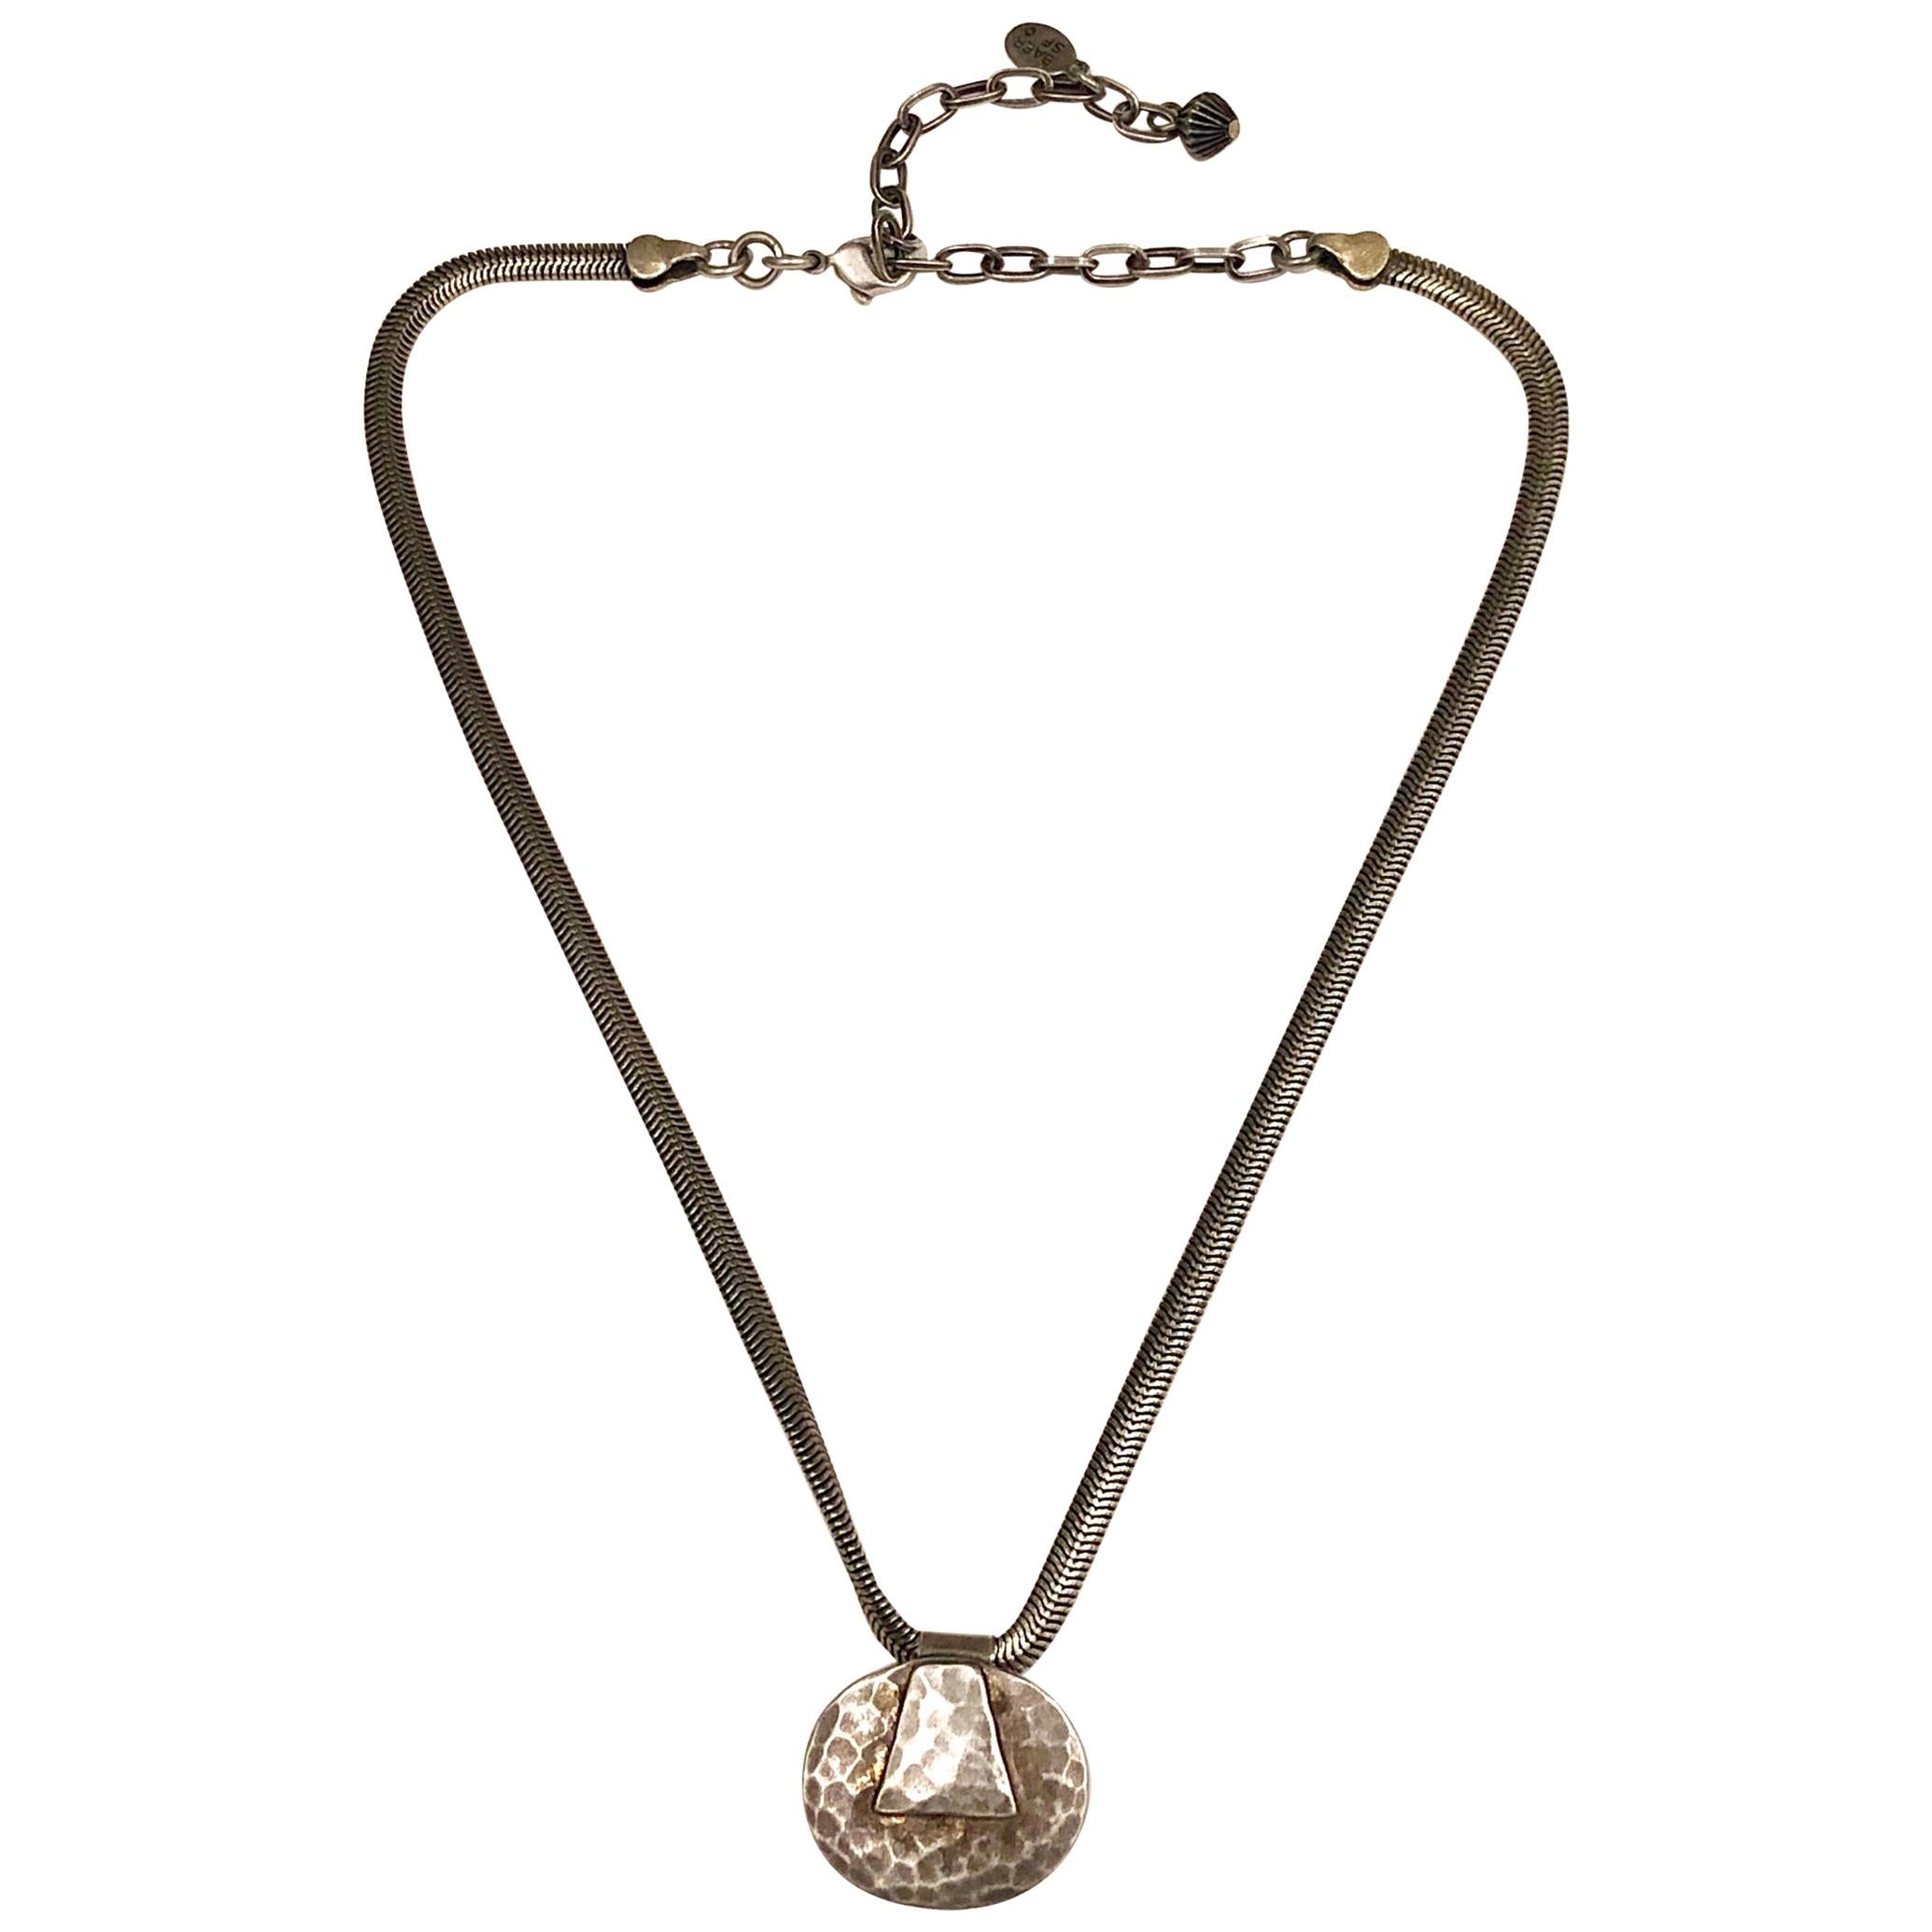 Postmodern Silver Hammered Pendant, Necklace by Marjorie Baer ...